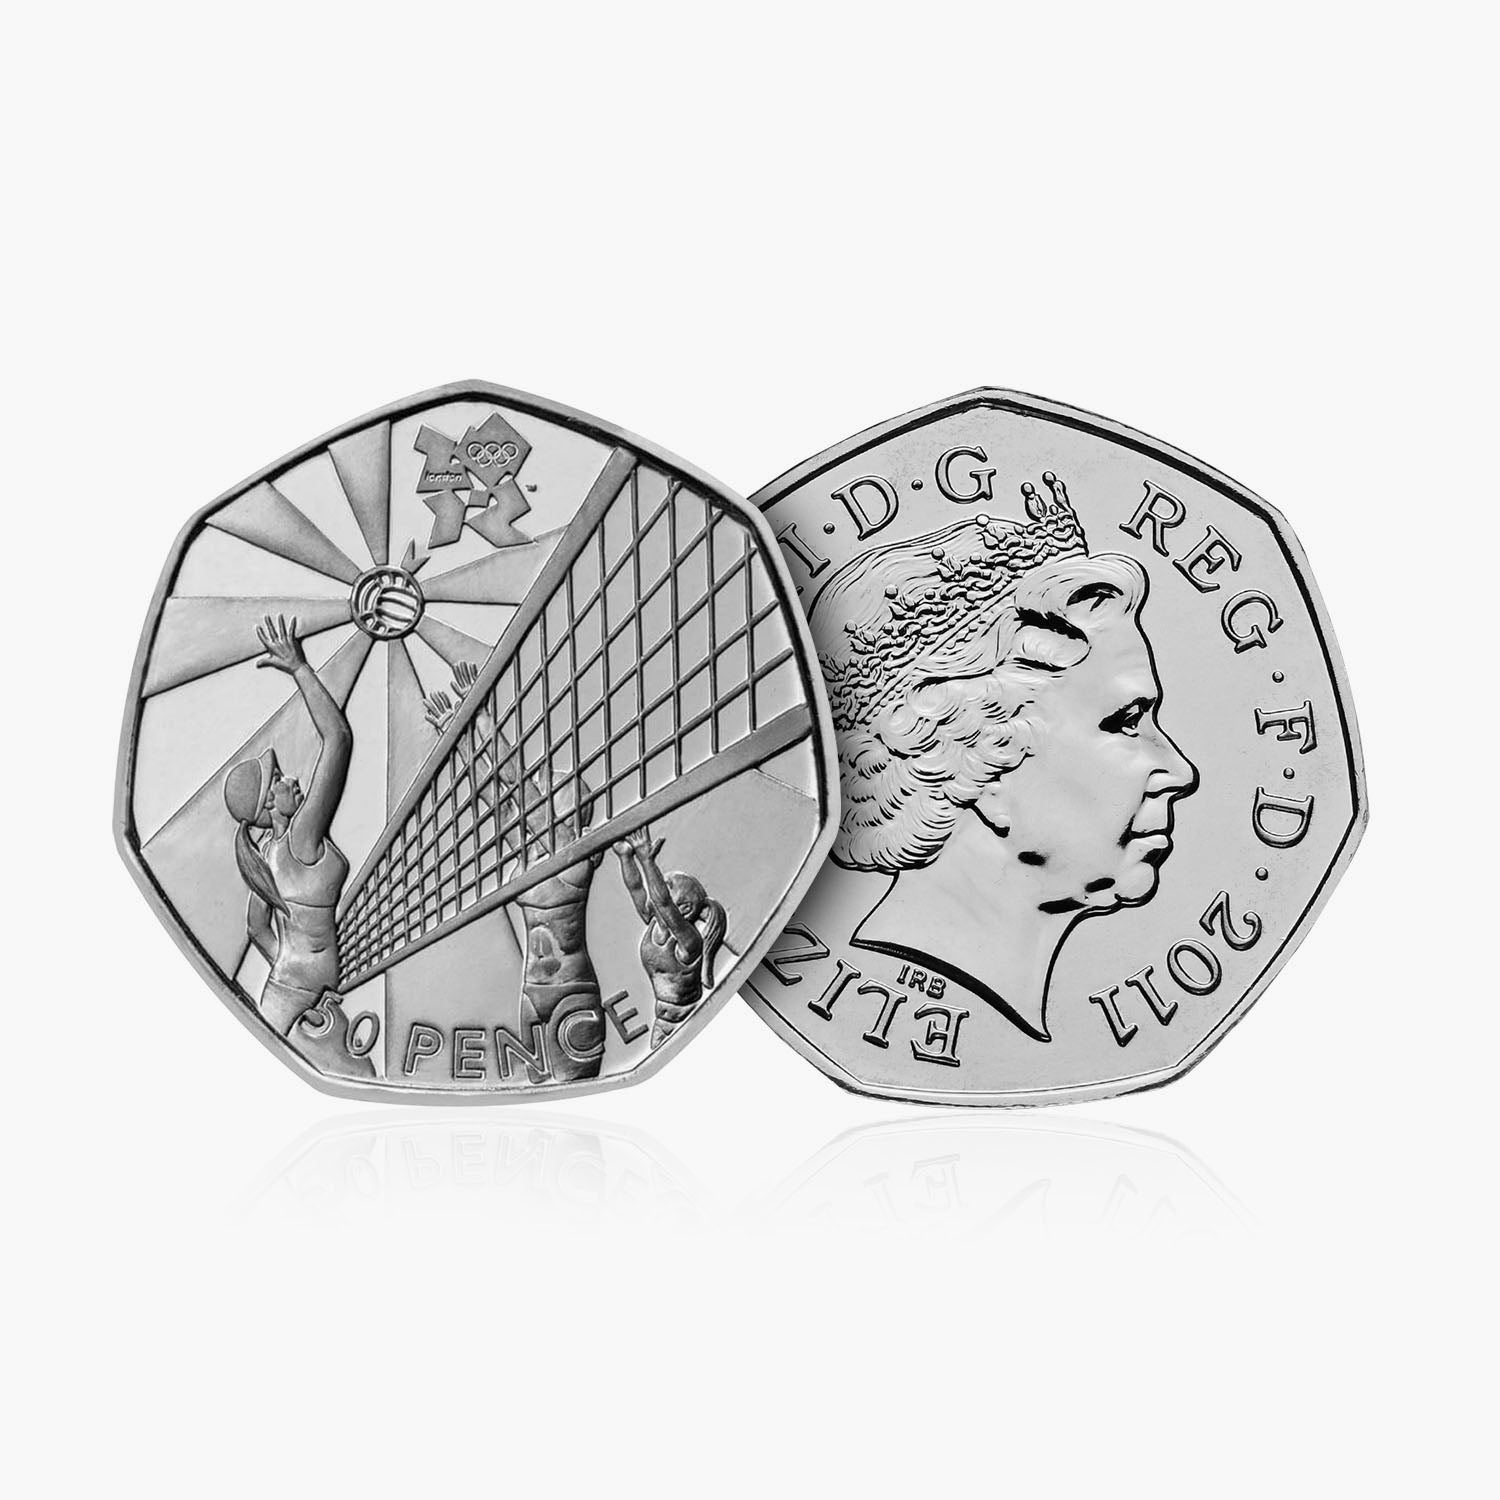 2011 Circulated Olympics - Volleyball 50p Coin